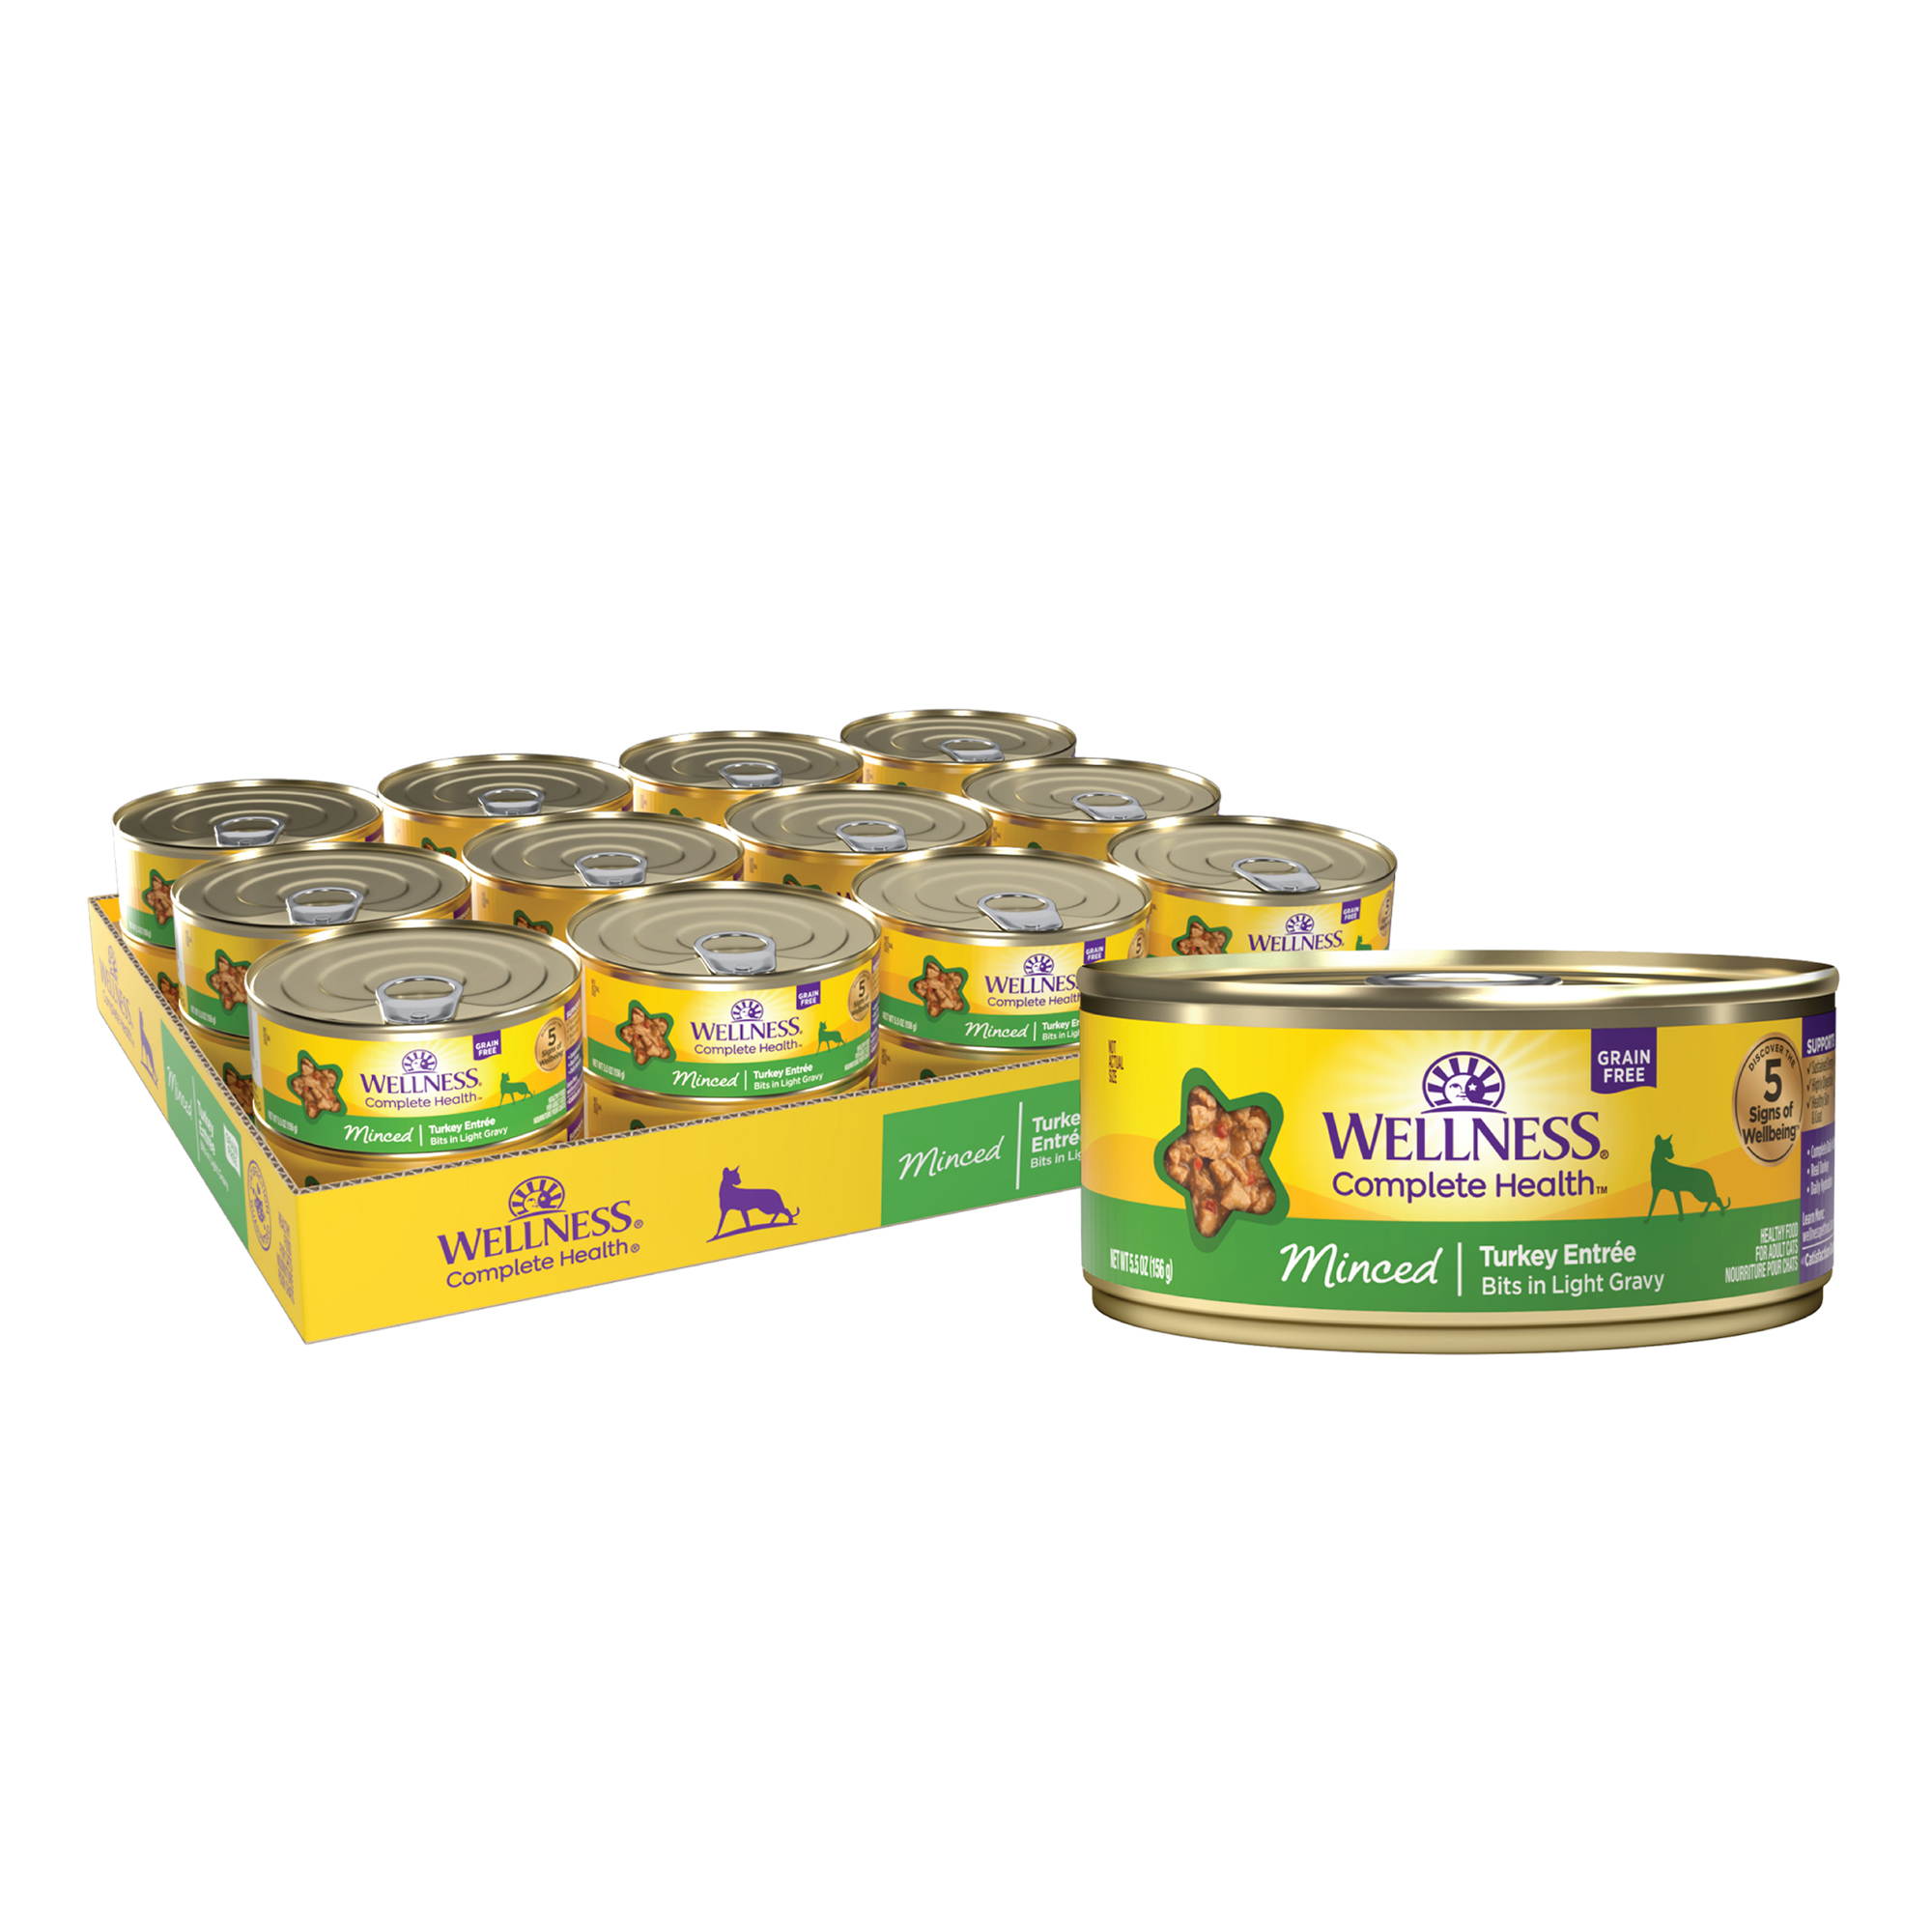 Wellness Complete Health Wet Canned Cat Food, Minced Turkey Entree, 5.5oz Can (Pack of 24) - image 1 of 9